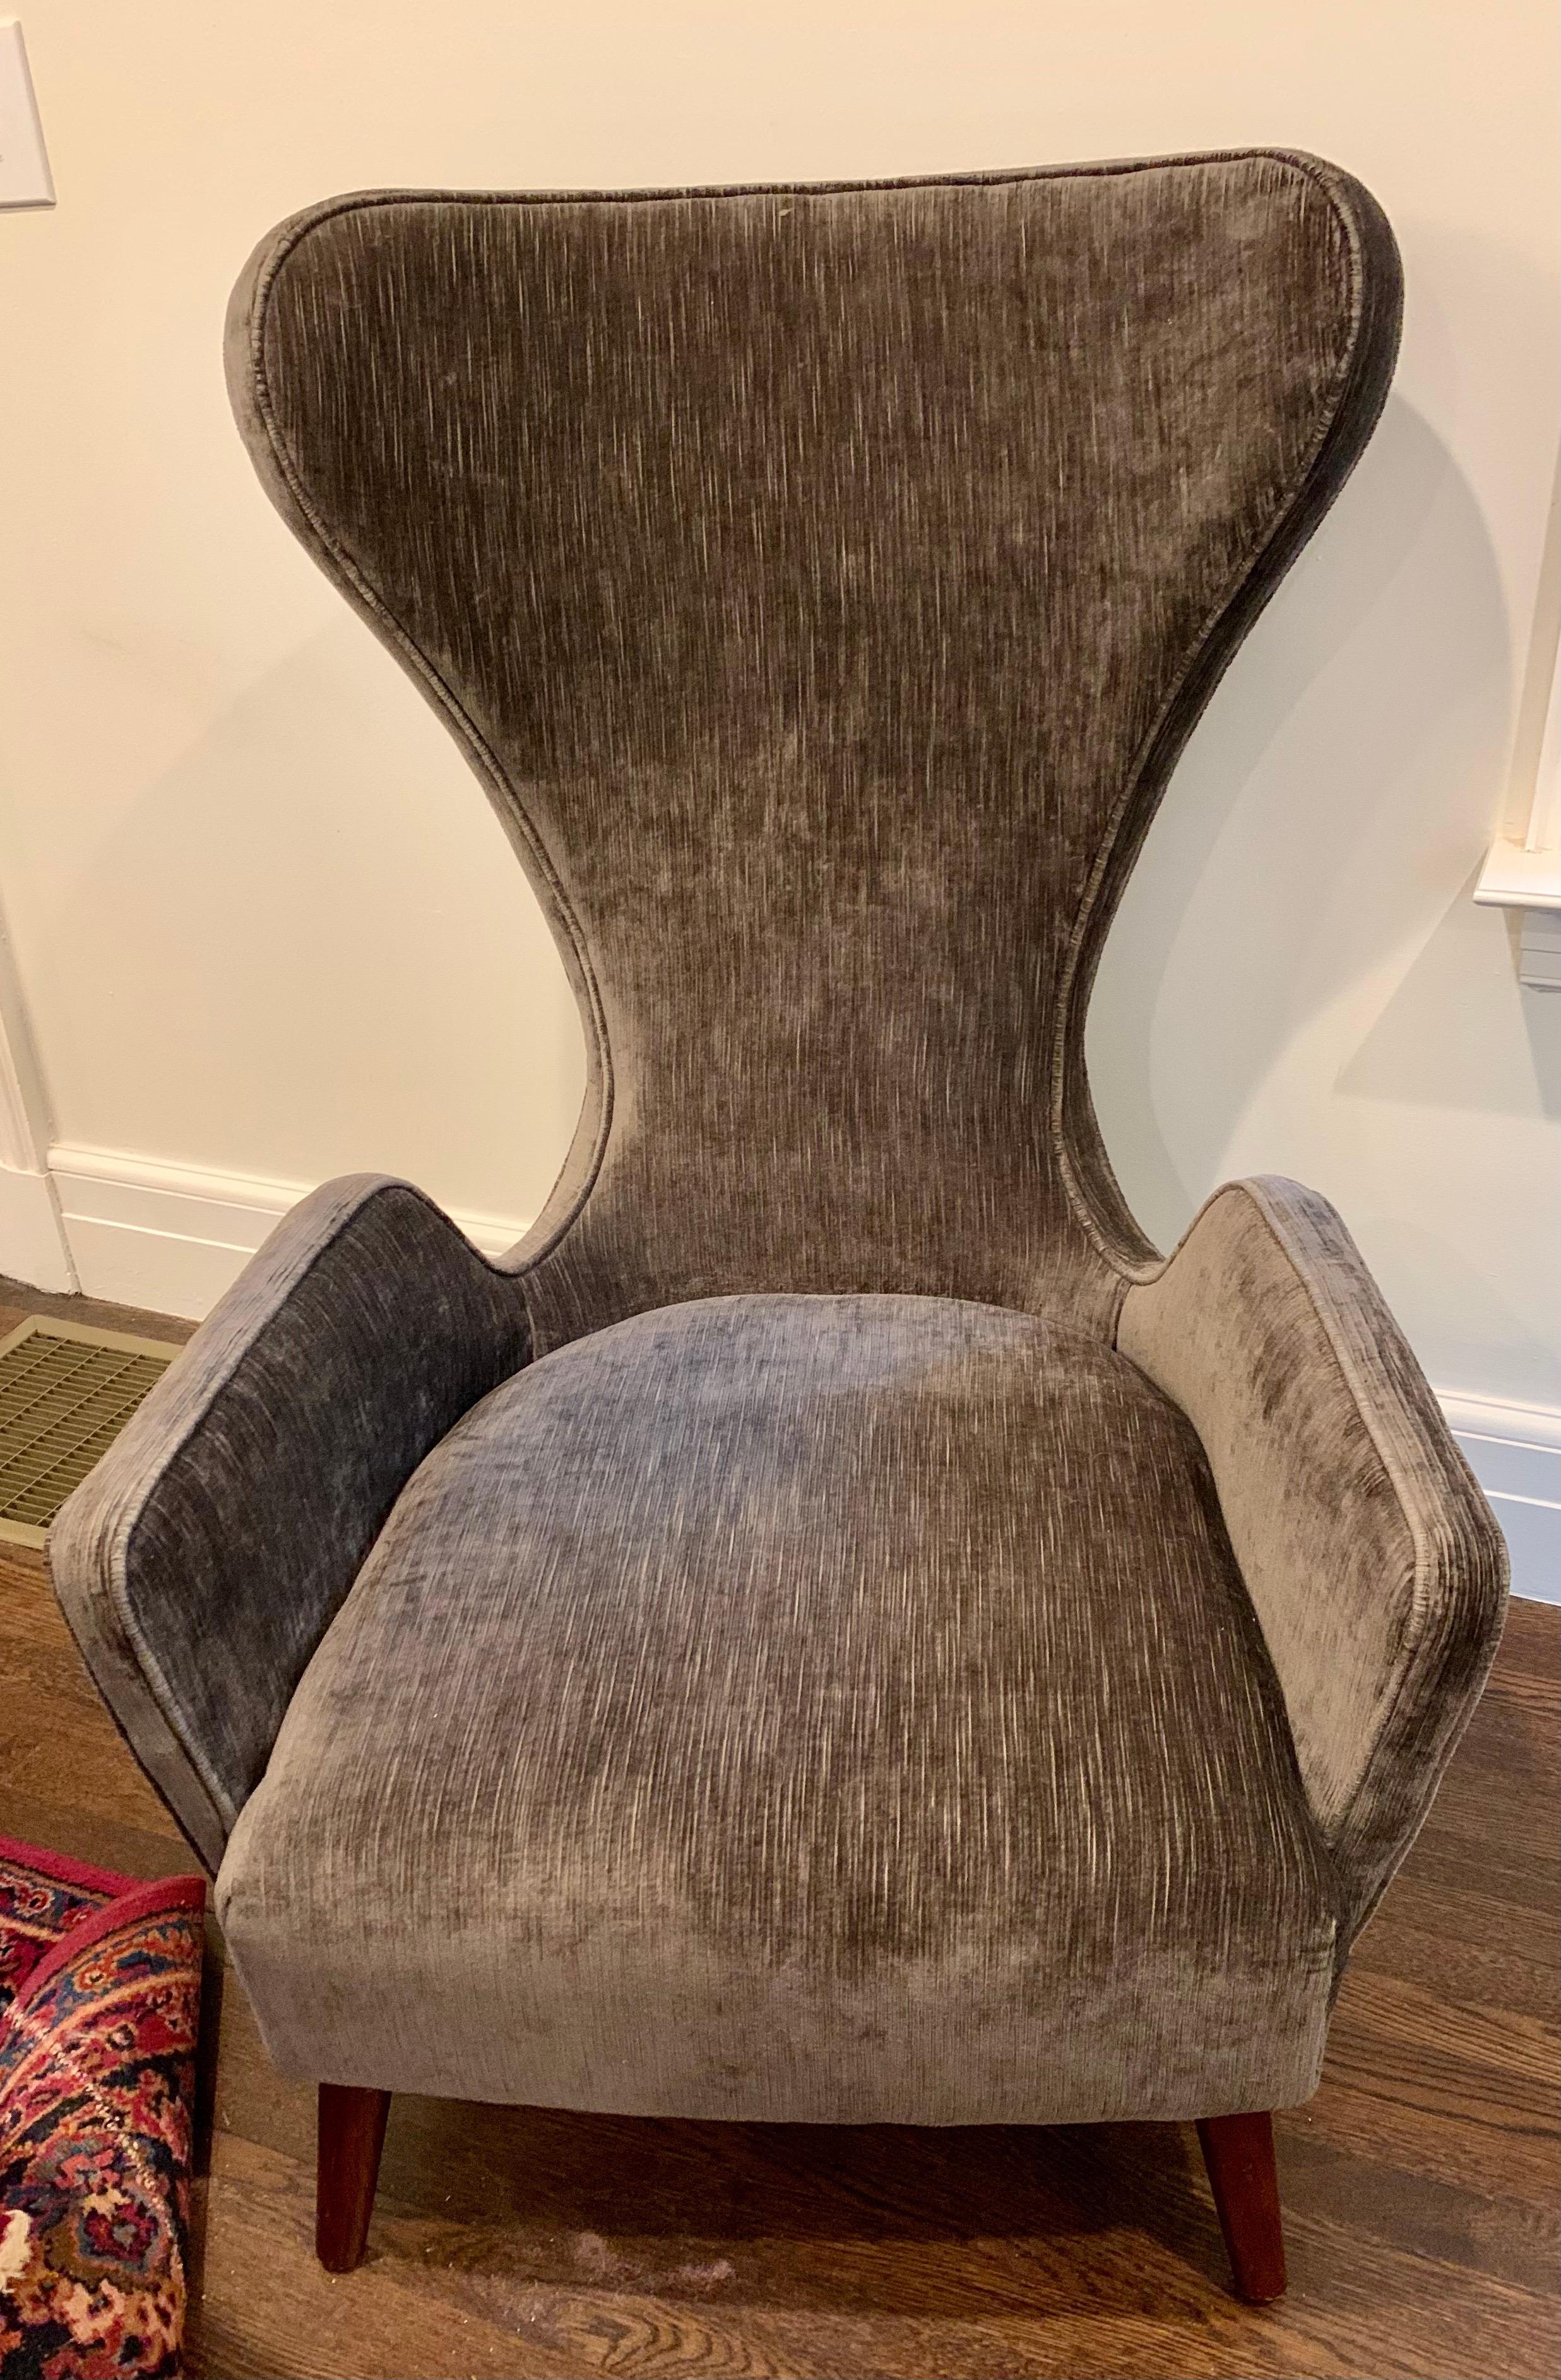 Stunning sculptural mid century wingback chair with coveted curved back and lines to die for. The second of two we will be selling this week exclusively on 1stDibs. Note fabric is almost brand new, less than 3 months old. See pics for color. Now,